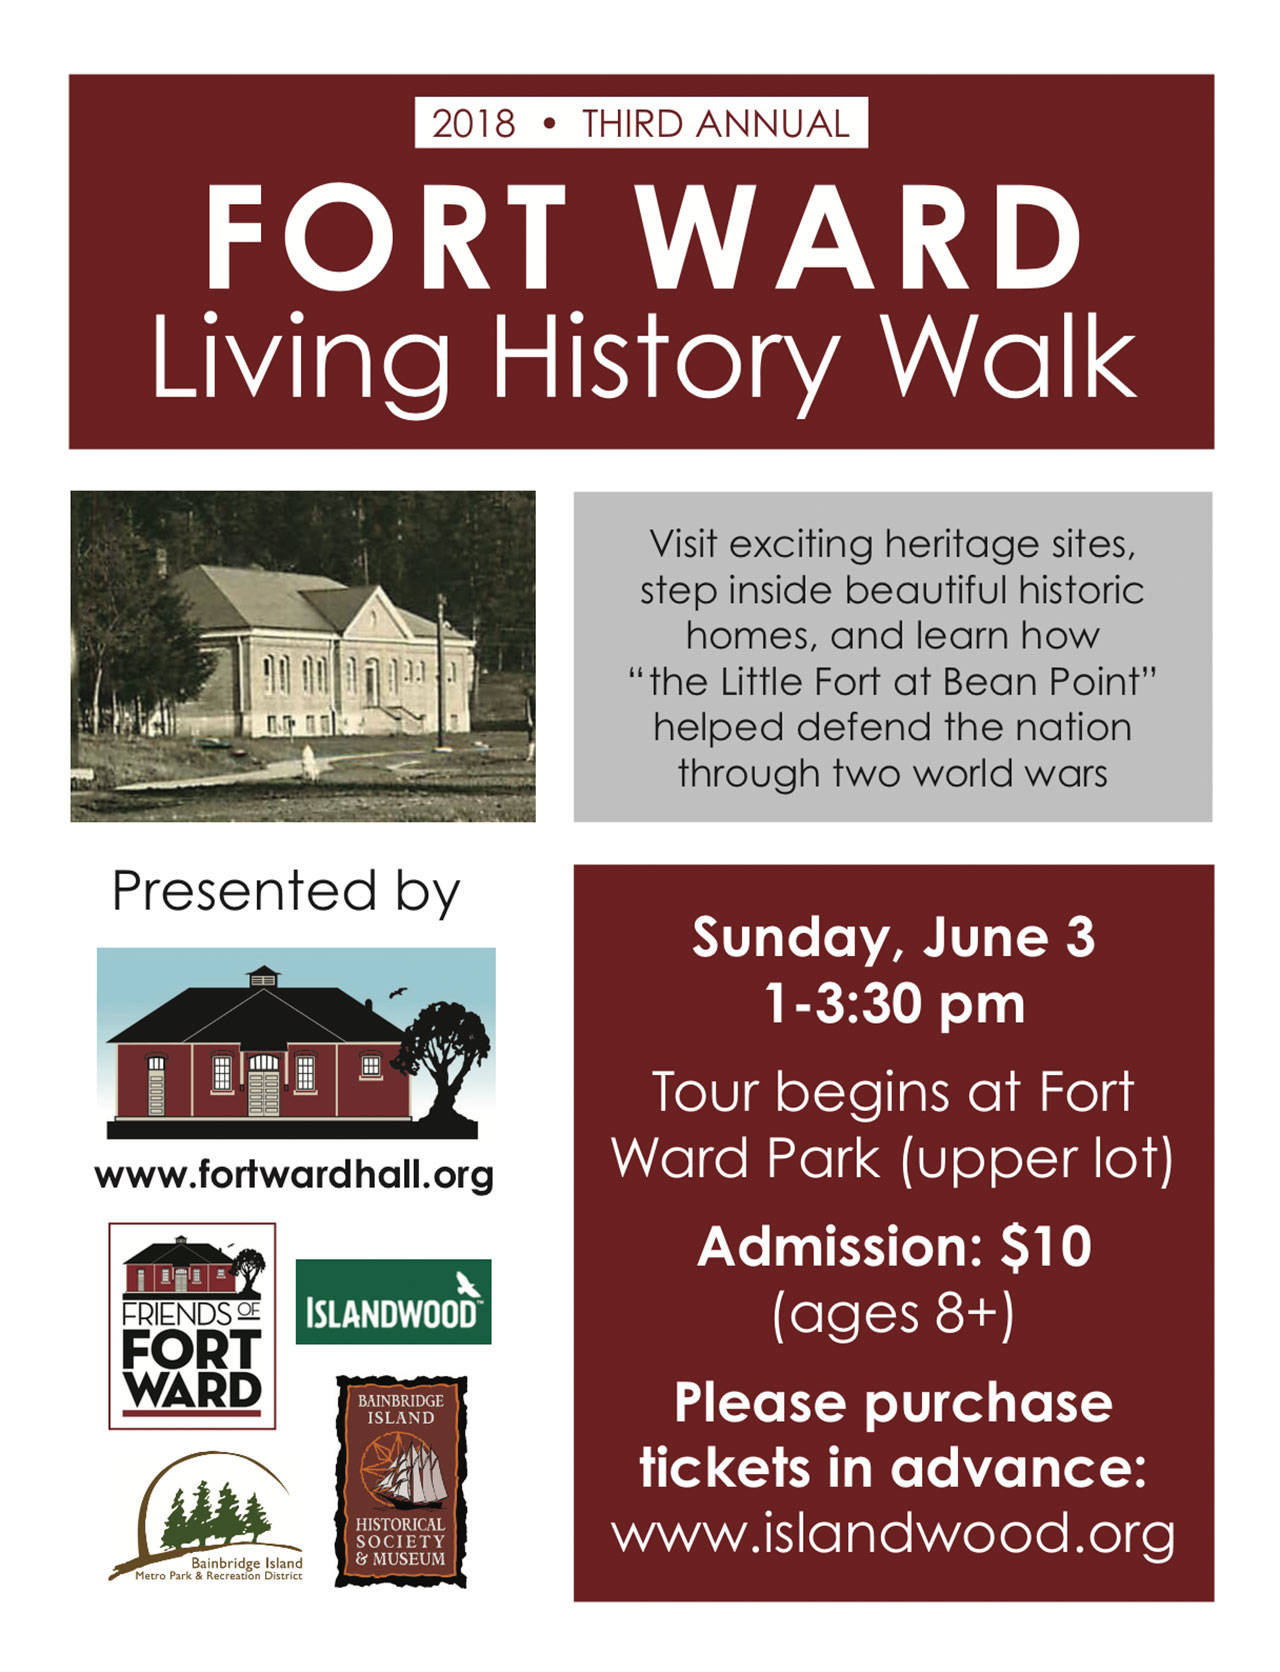 Image courtesy of Douglas Crist | The third annual Living History Walk will again take visitors on trip to exciting heritage sites Sunday, June 3.